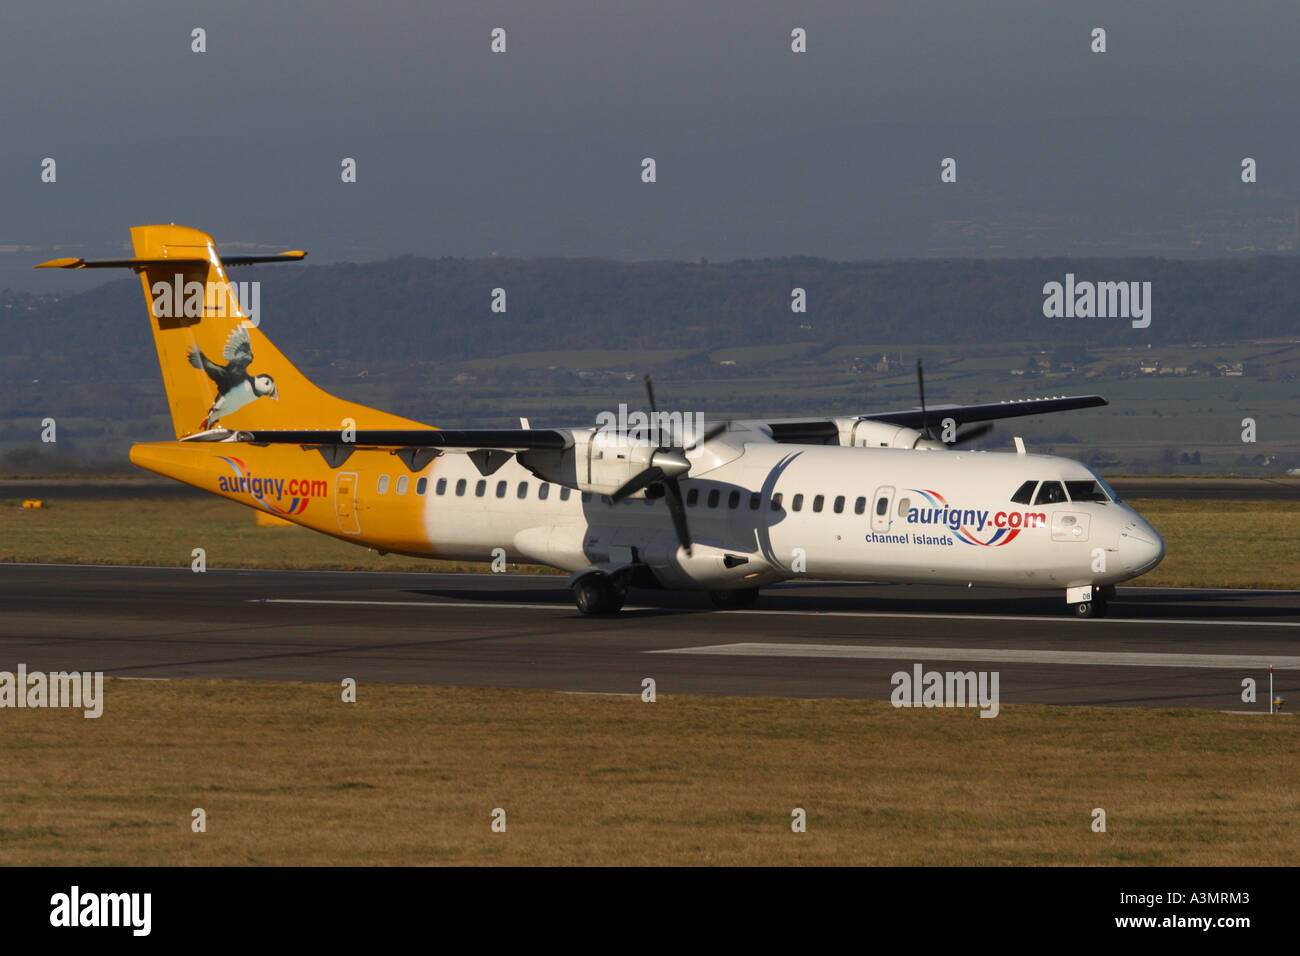 Aurigny airlines ATR-72 regional airliner operates from the Channel Islands Stock Photo